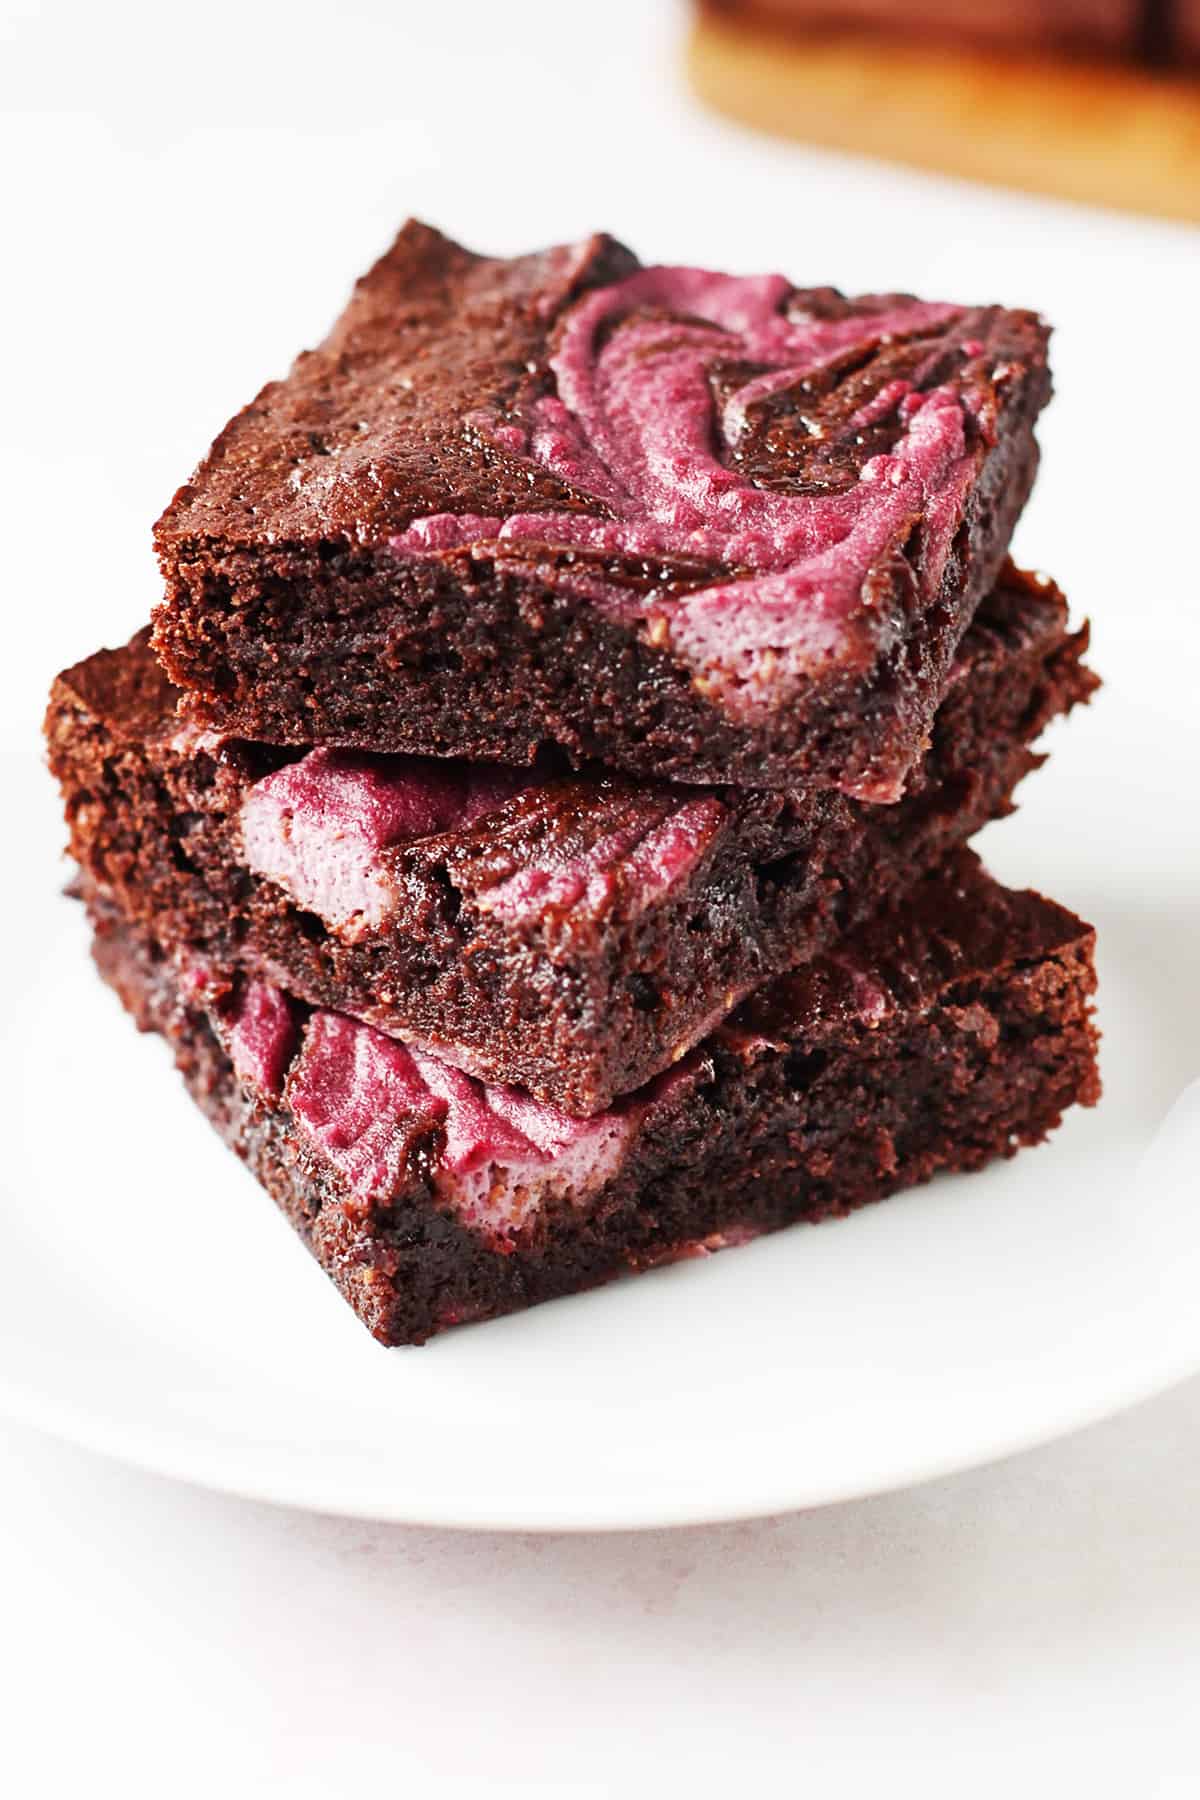 A stack of chocolate raspberry brownies on a plate.